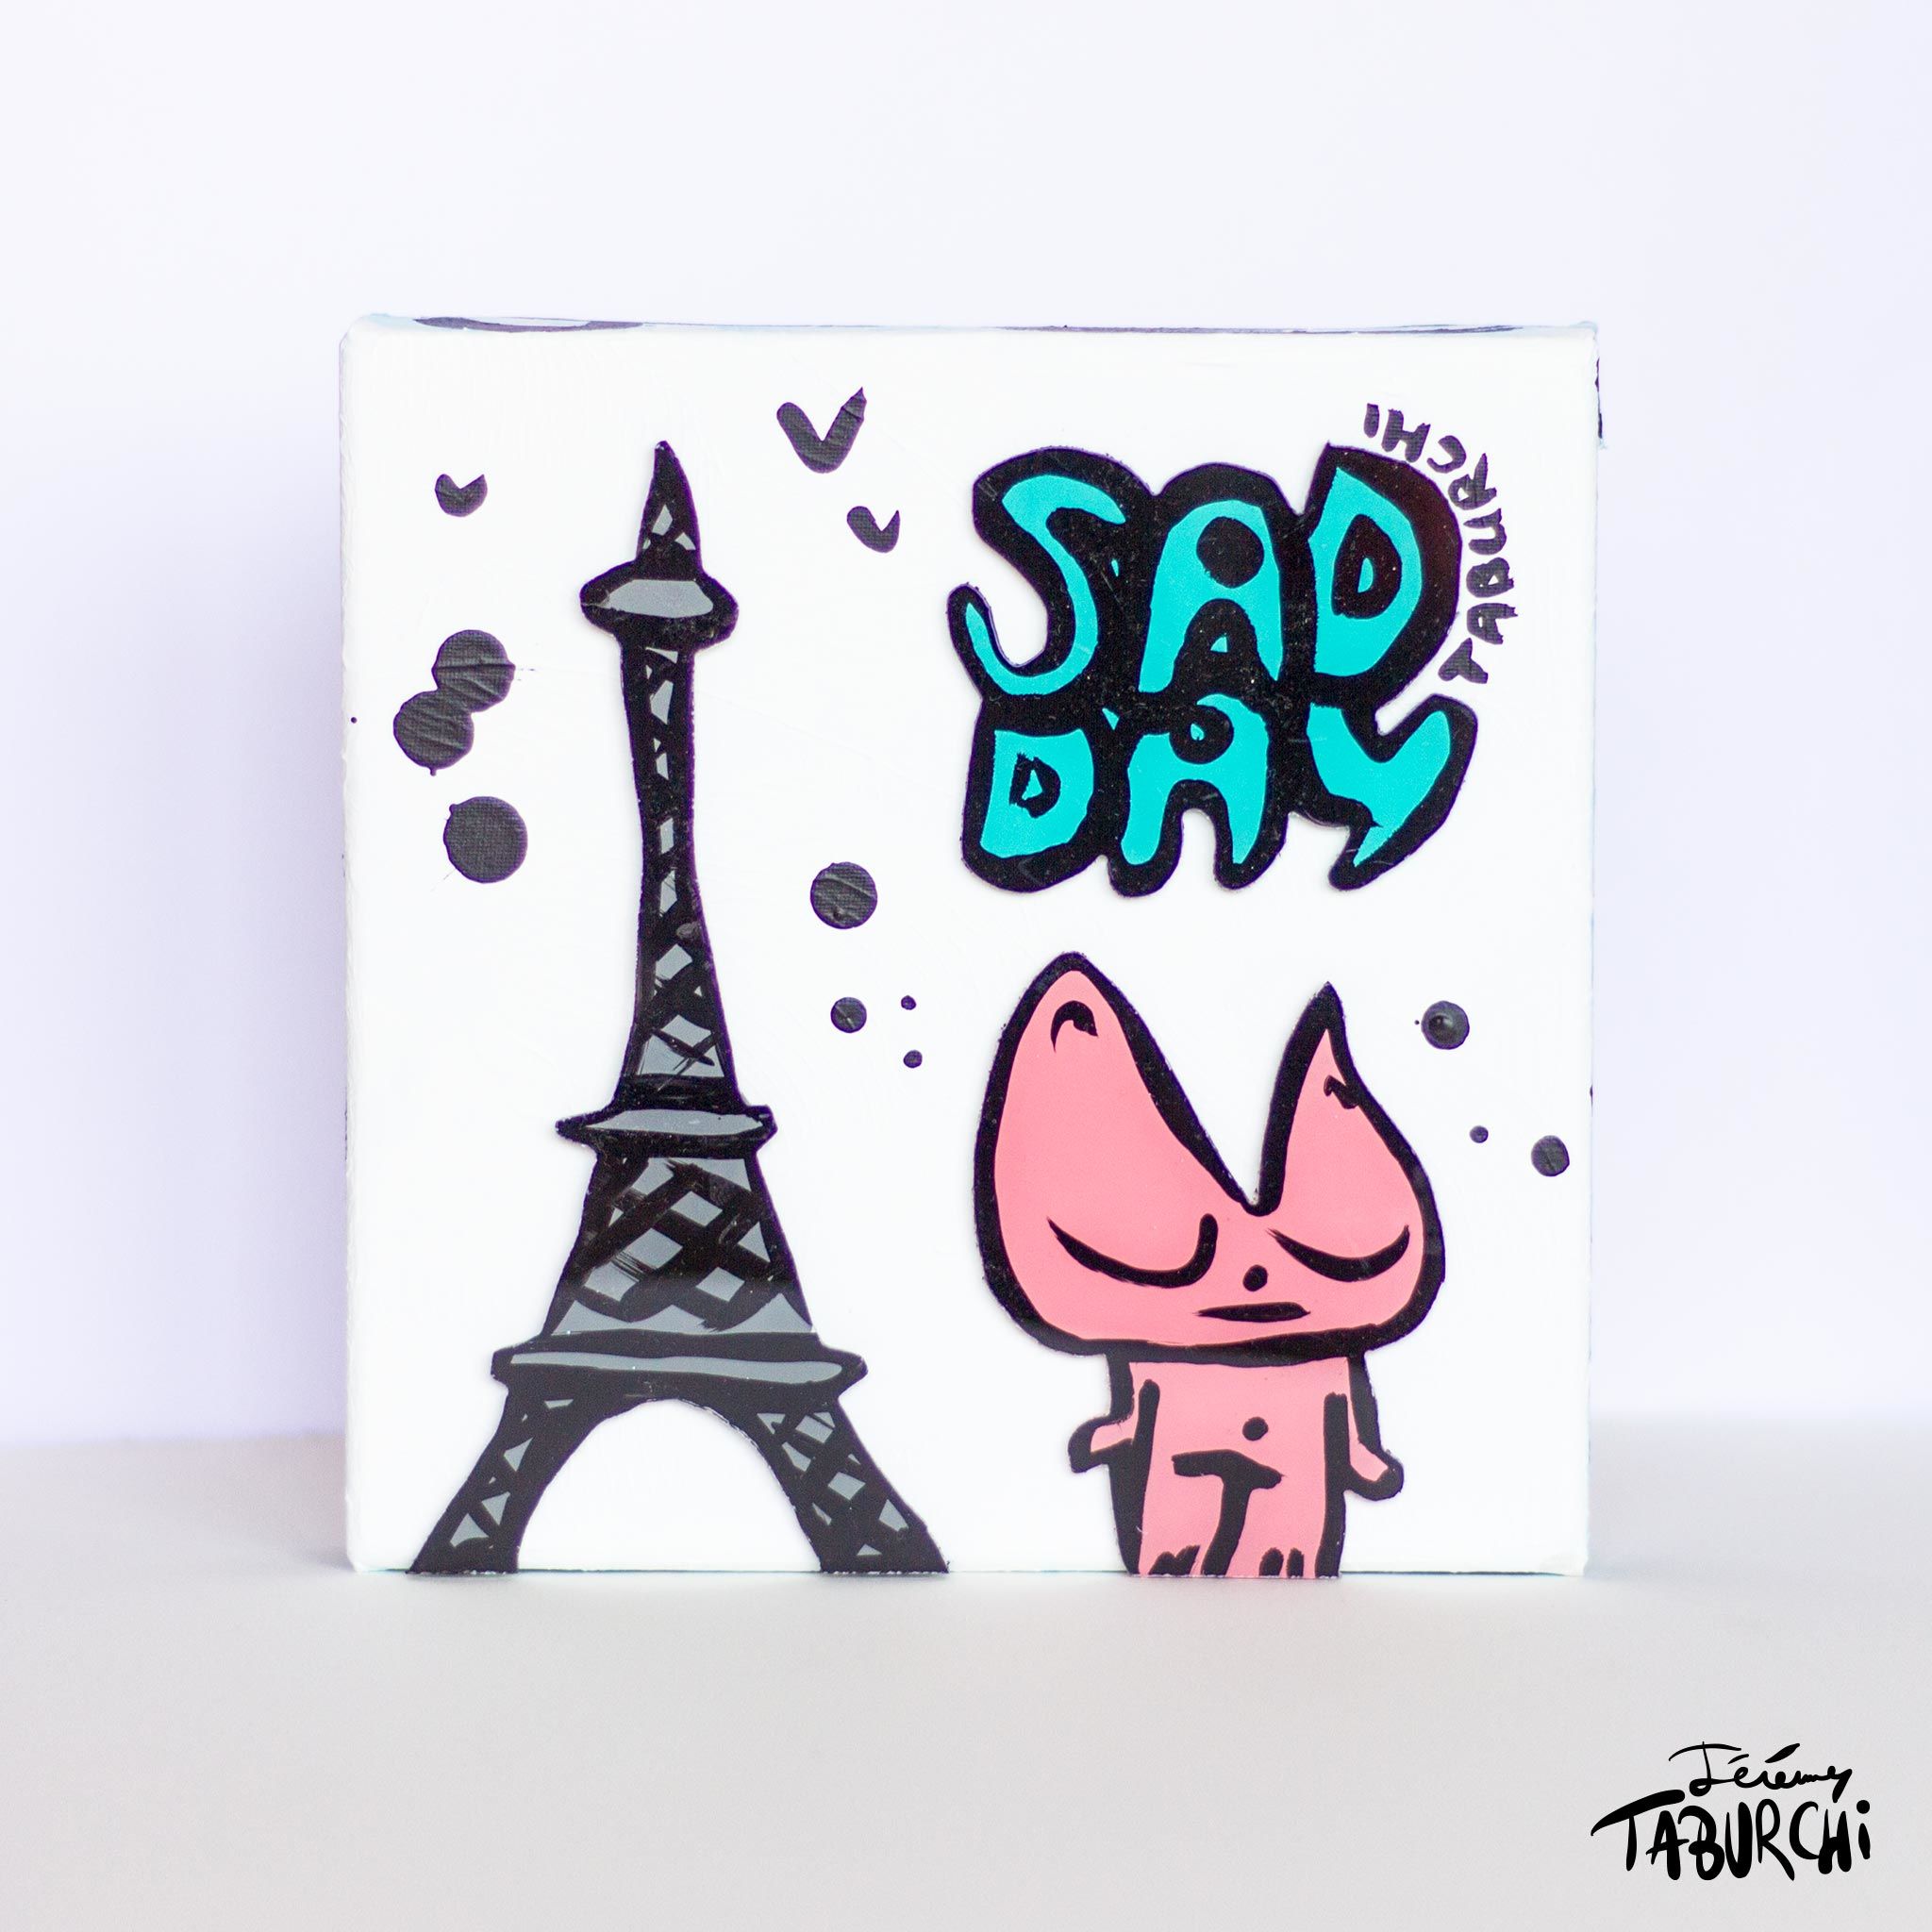 Pray for Paris by the Pink Cat  Jérémy Taburchi's Art Gallery